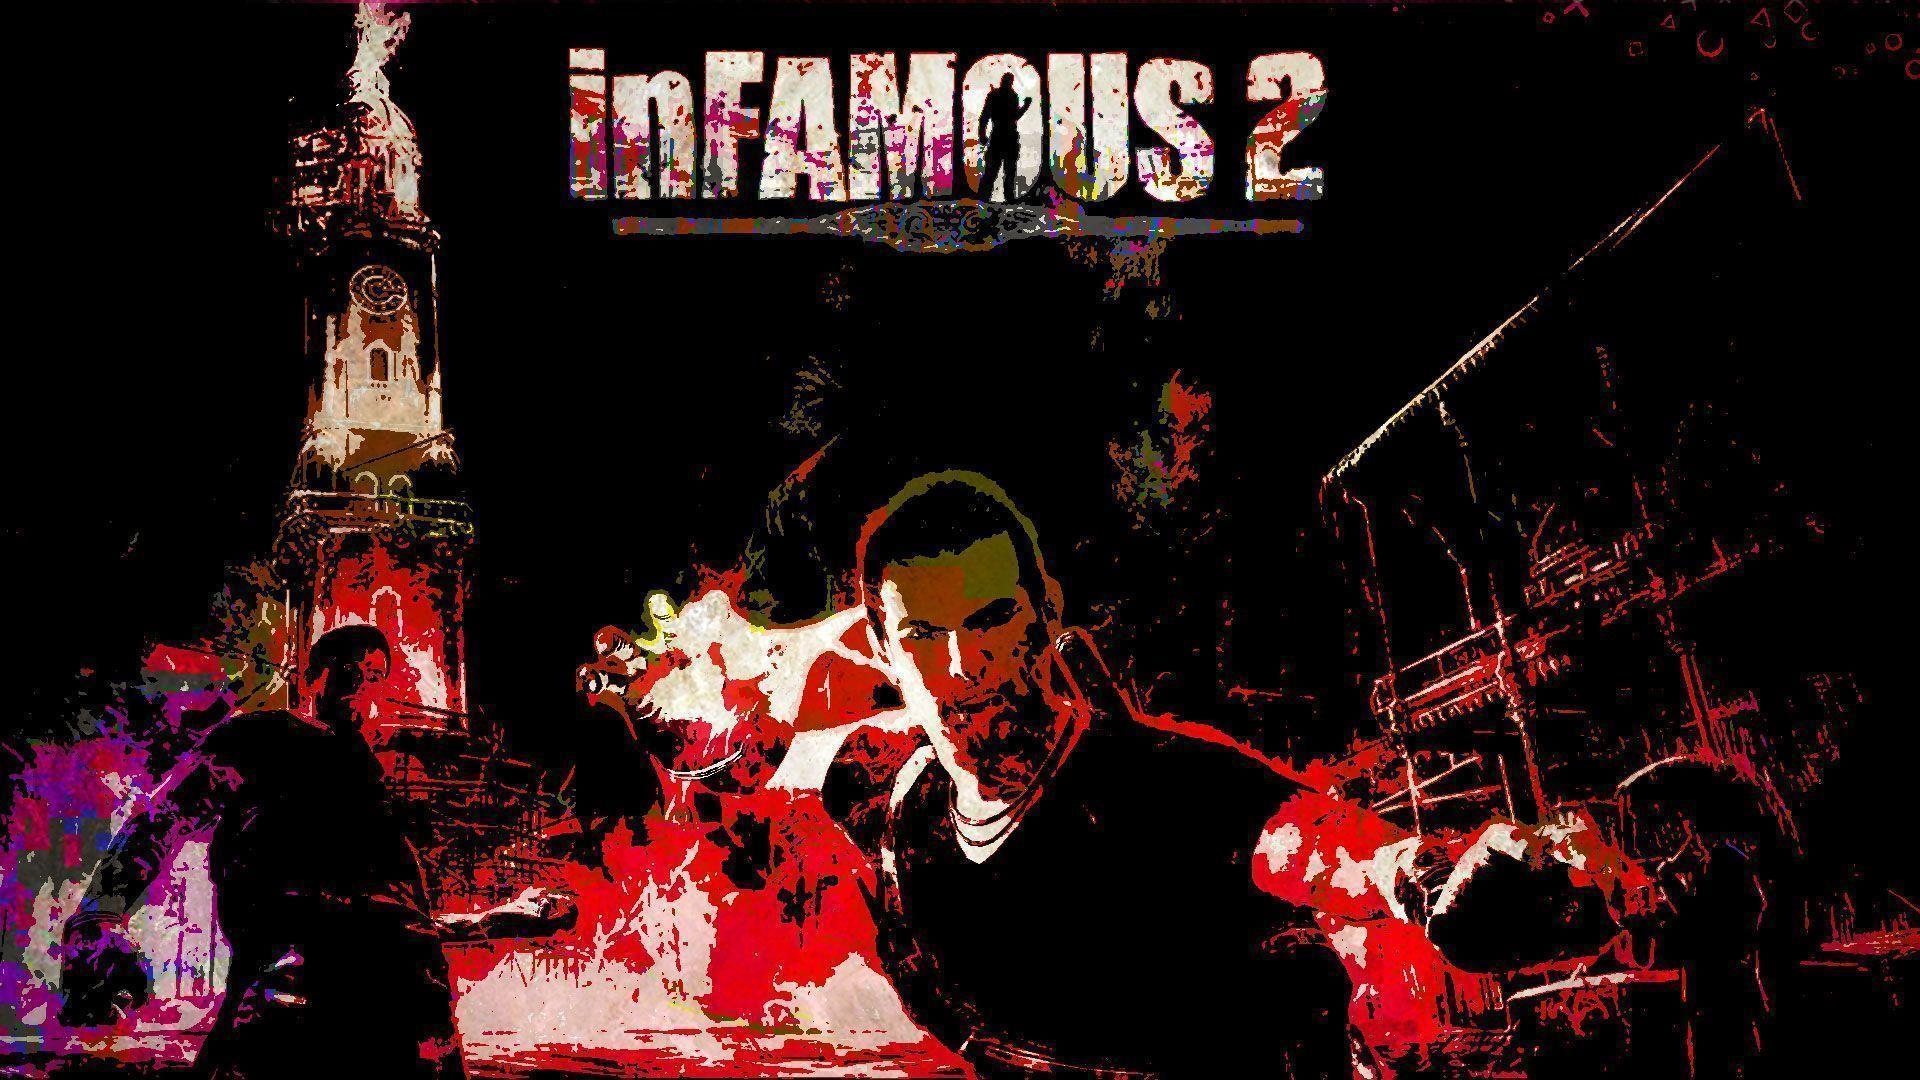 Download InFamous 2 Game Wallpaper HD (5757) Full Size. Game